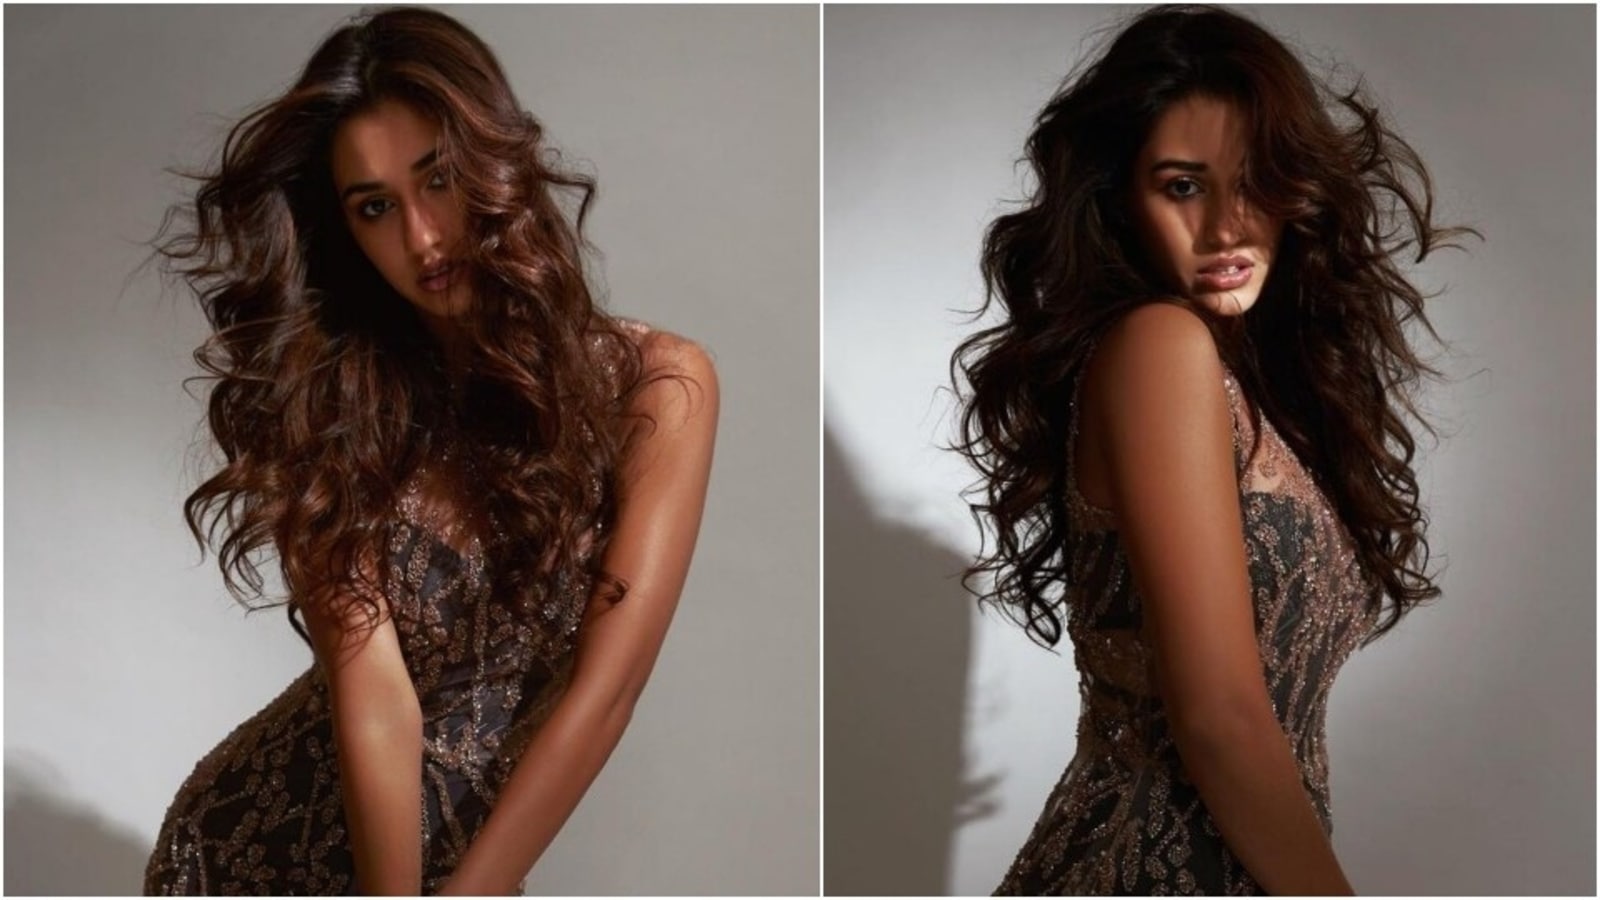 Disha Patani Aces Her Own Make Up With Sheer Nude Dress In New Pics